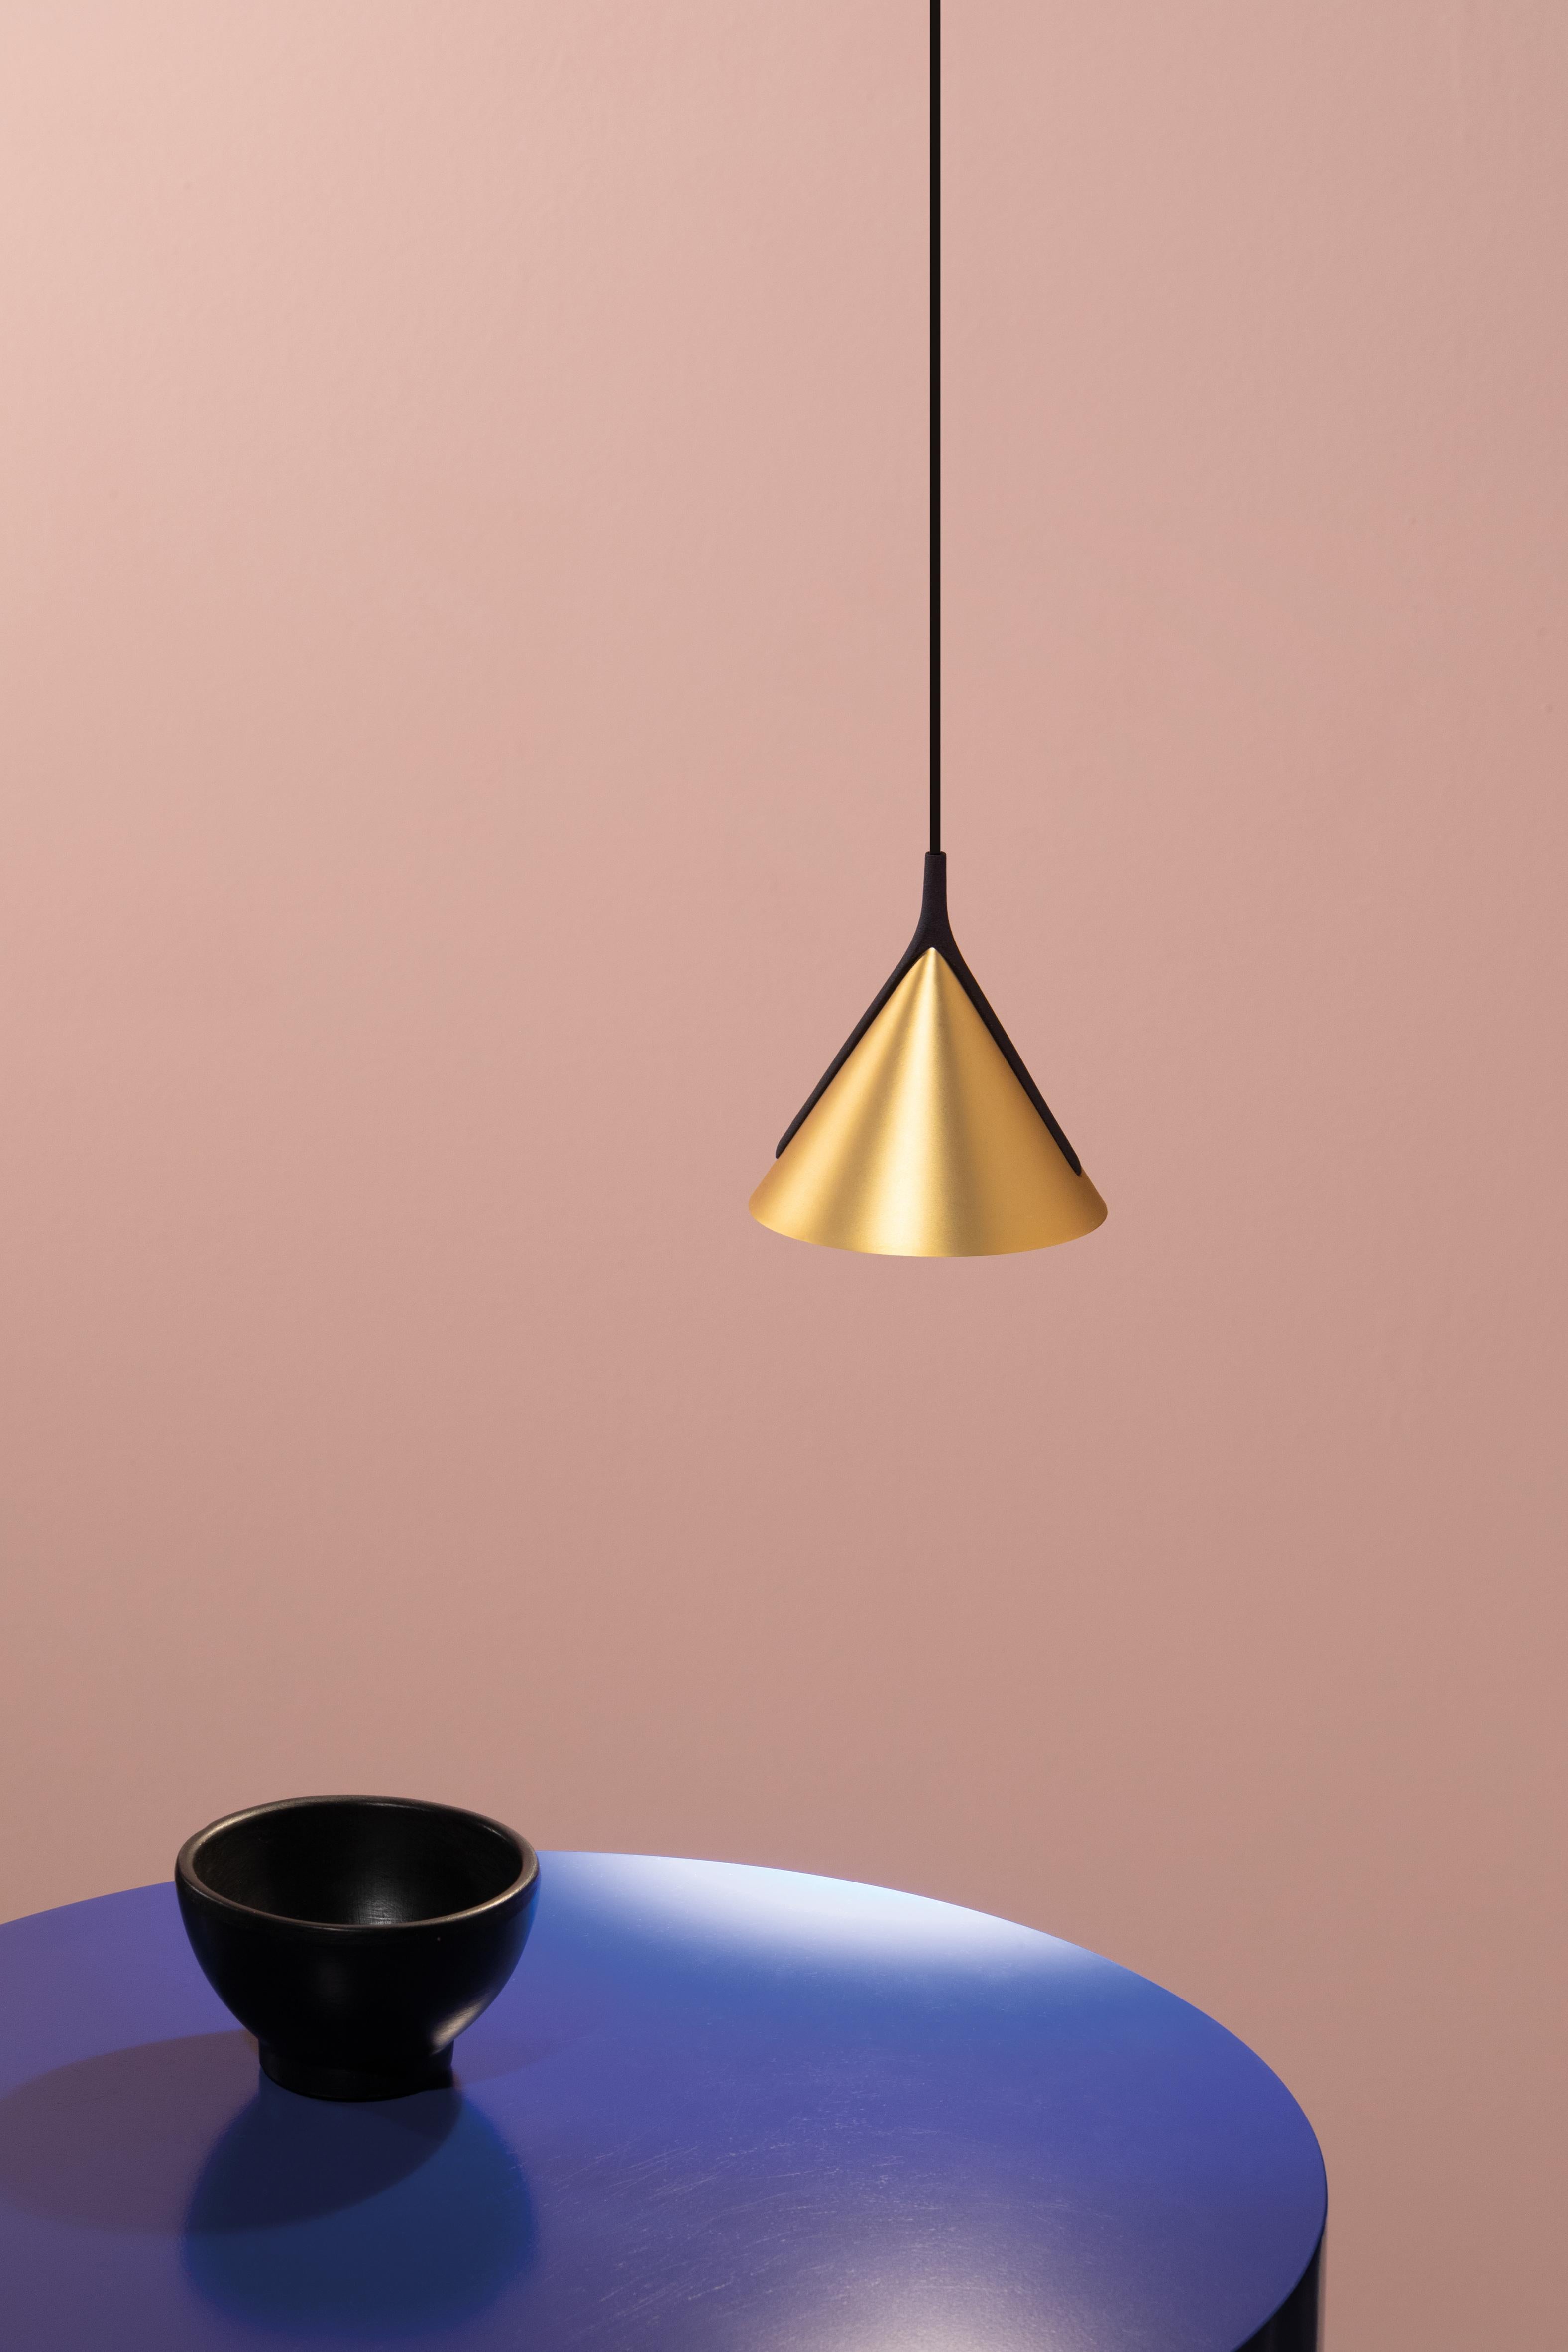 Axolight Jewel Mono Small Pendant Light in Gold with Black Finish by Yonoh

Synthesizing is the gift of knowing how to transmit complex things in a simple way. Jewel mono summarizes: minimalism in design and high lighting performance, aesthetic